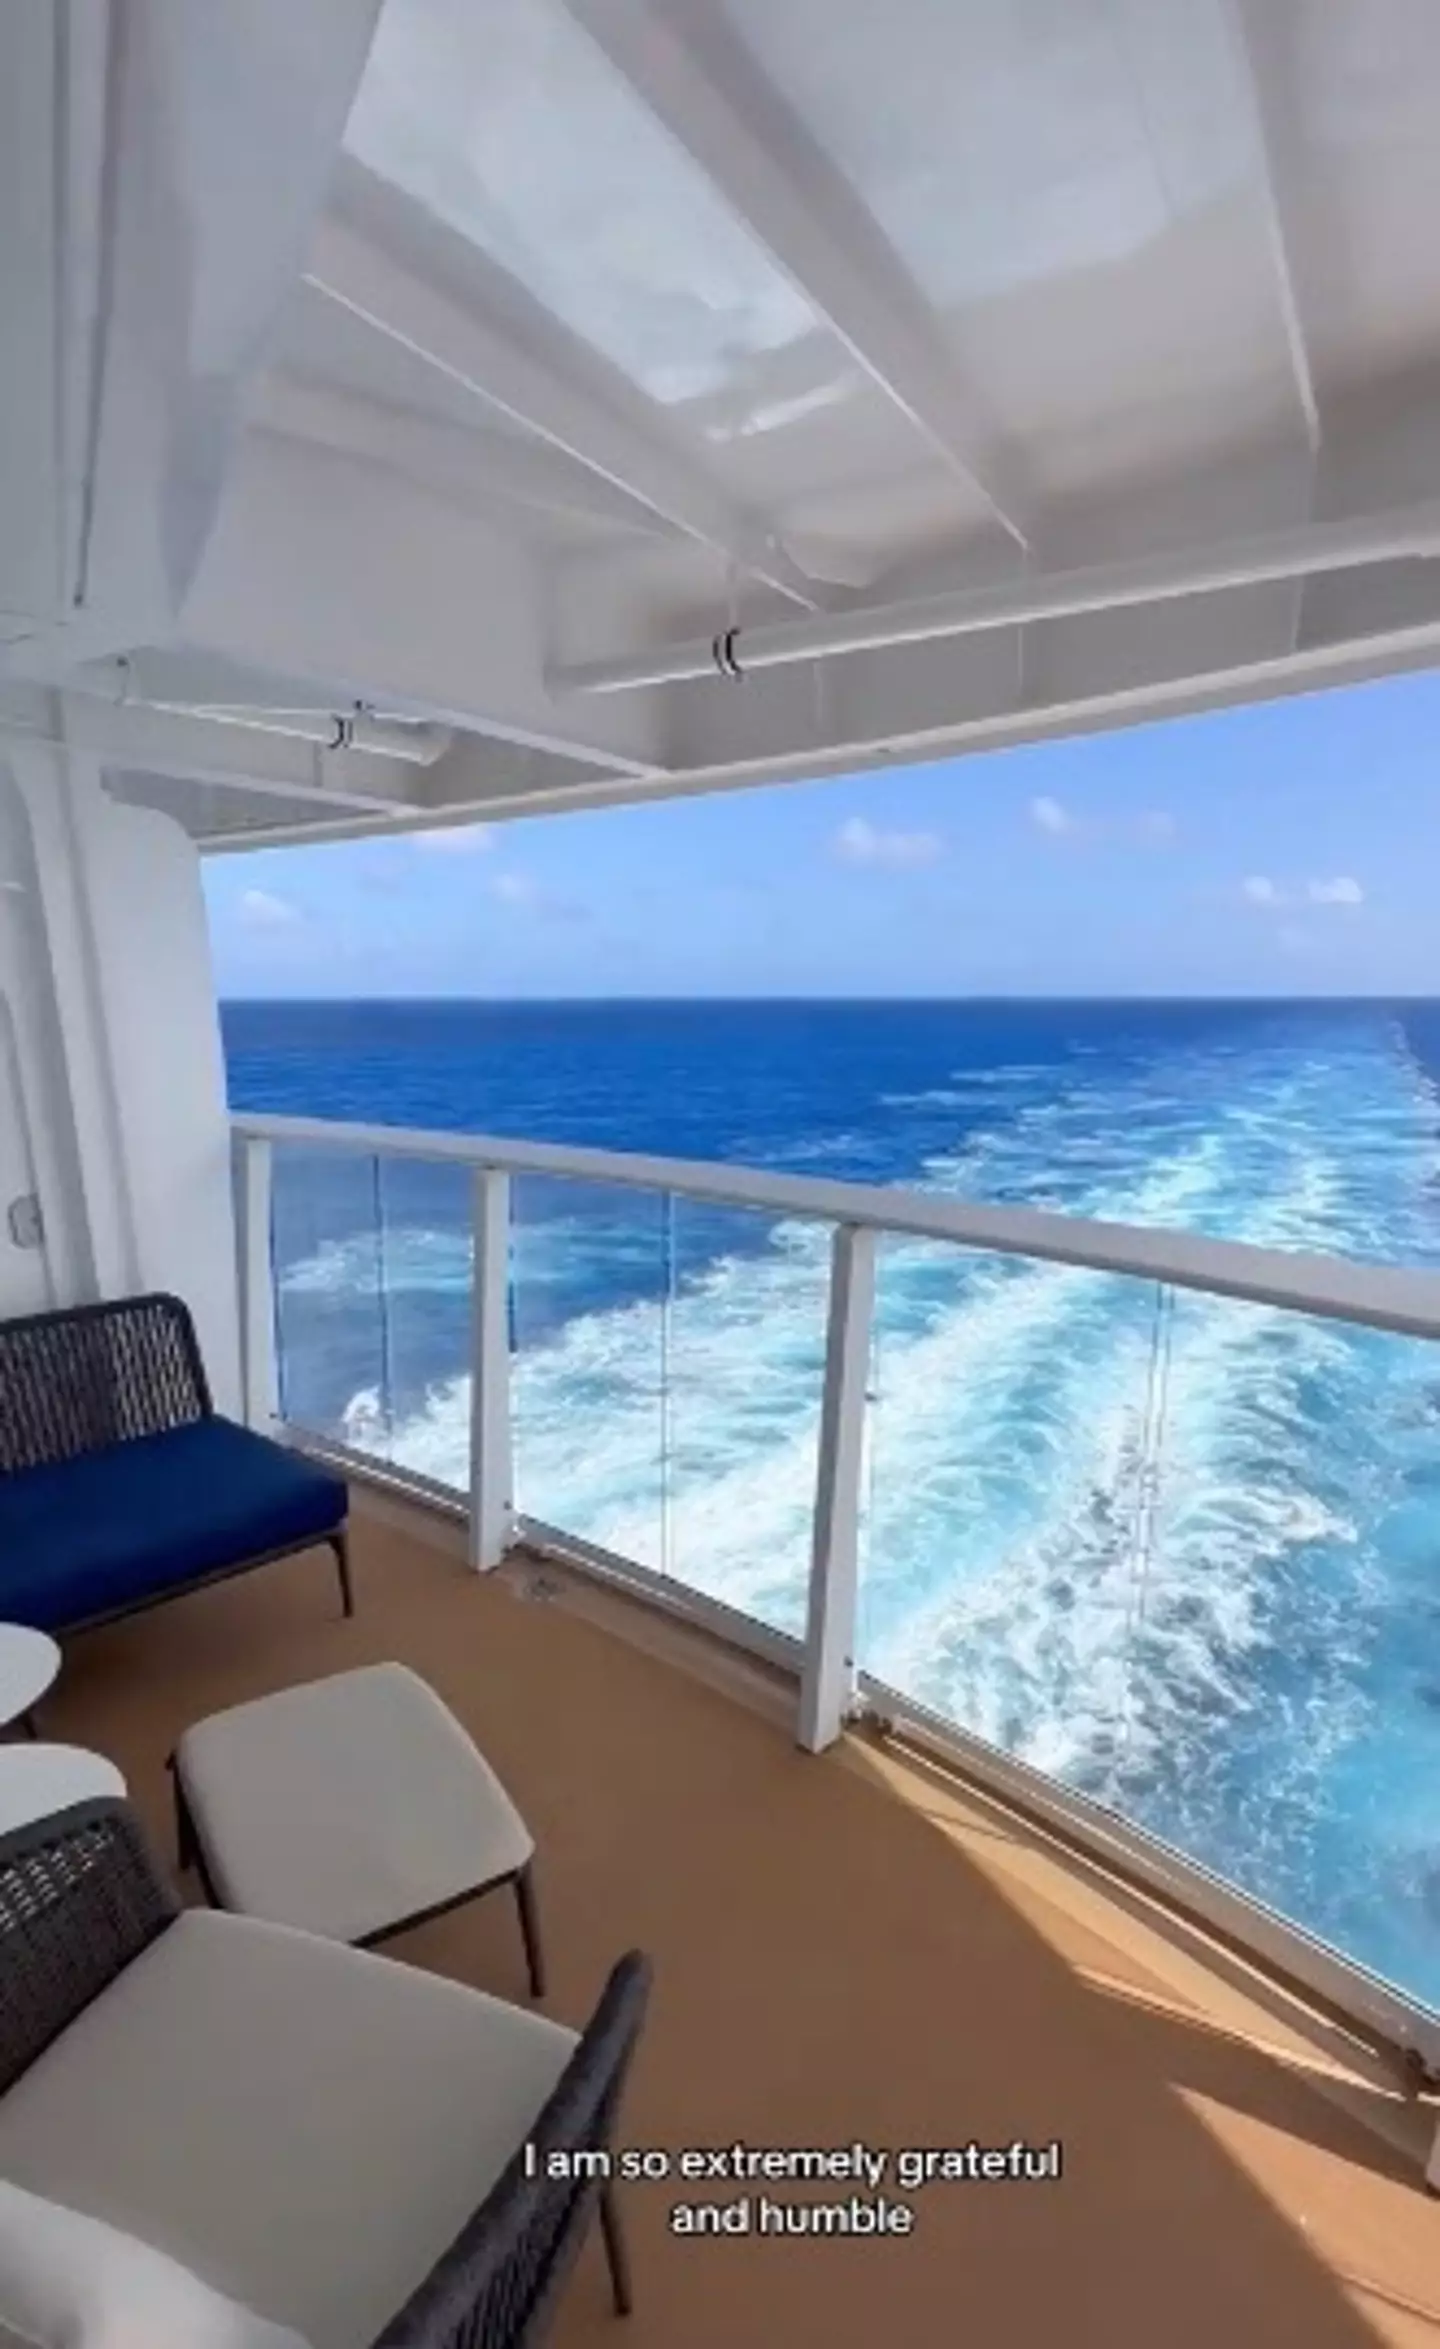 US TikToker Erica is making us feel very jealous on this cold Monday morning as she has been uploading her stay on Royal Caribbean’s new 365m-long (1,197 ft) cruise ship.